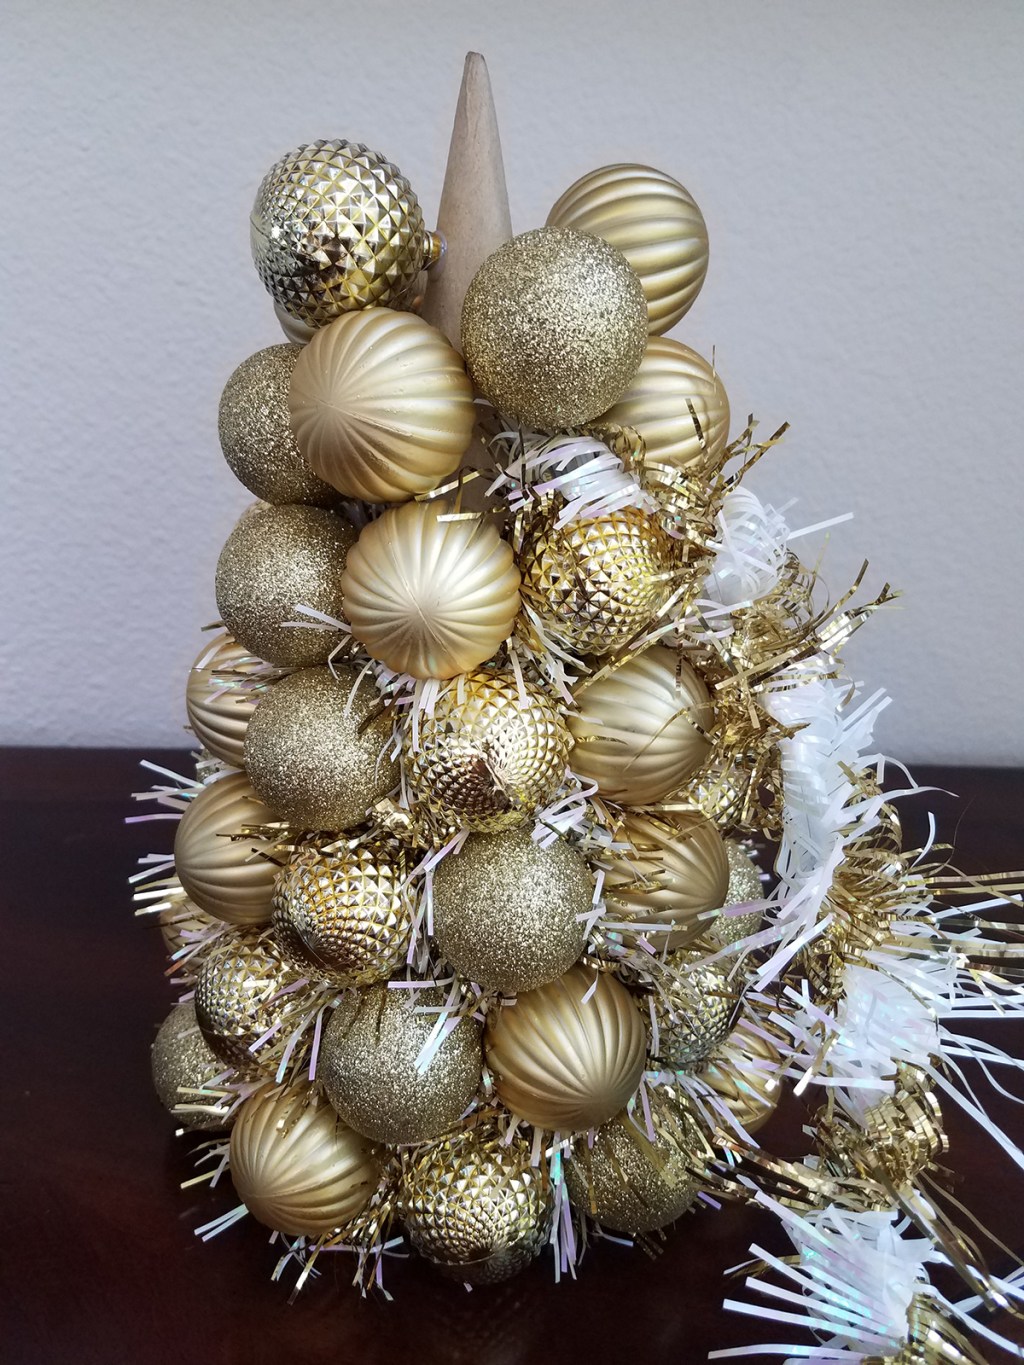 Adding white and gold garland to gold ornament centerpiece